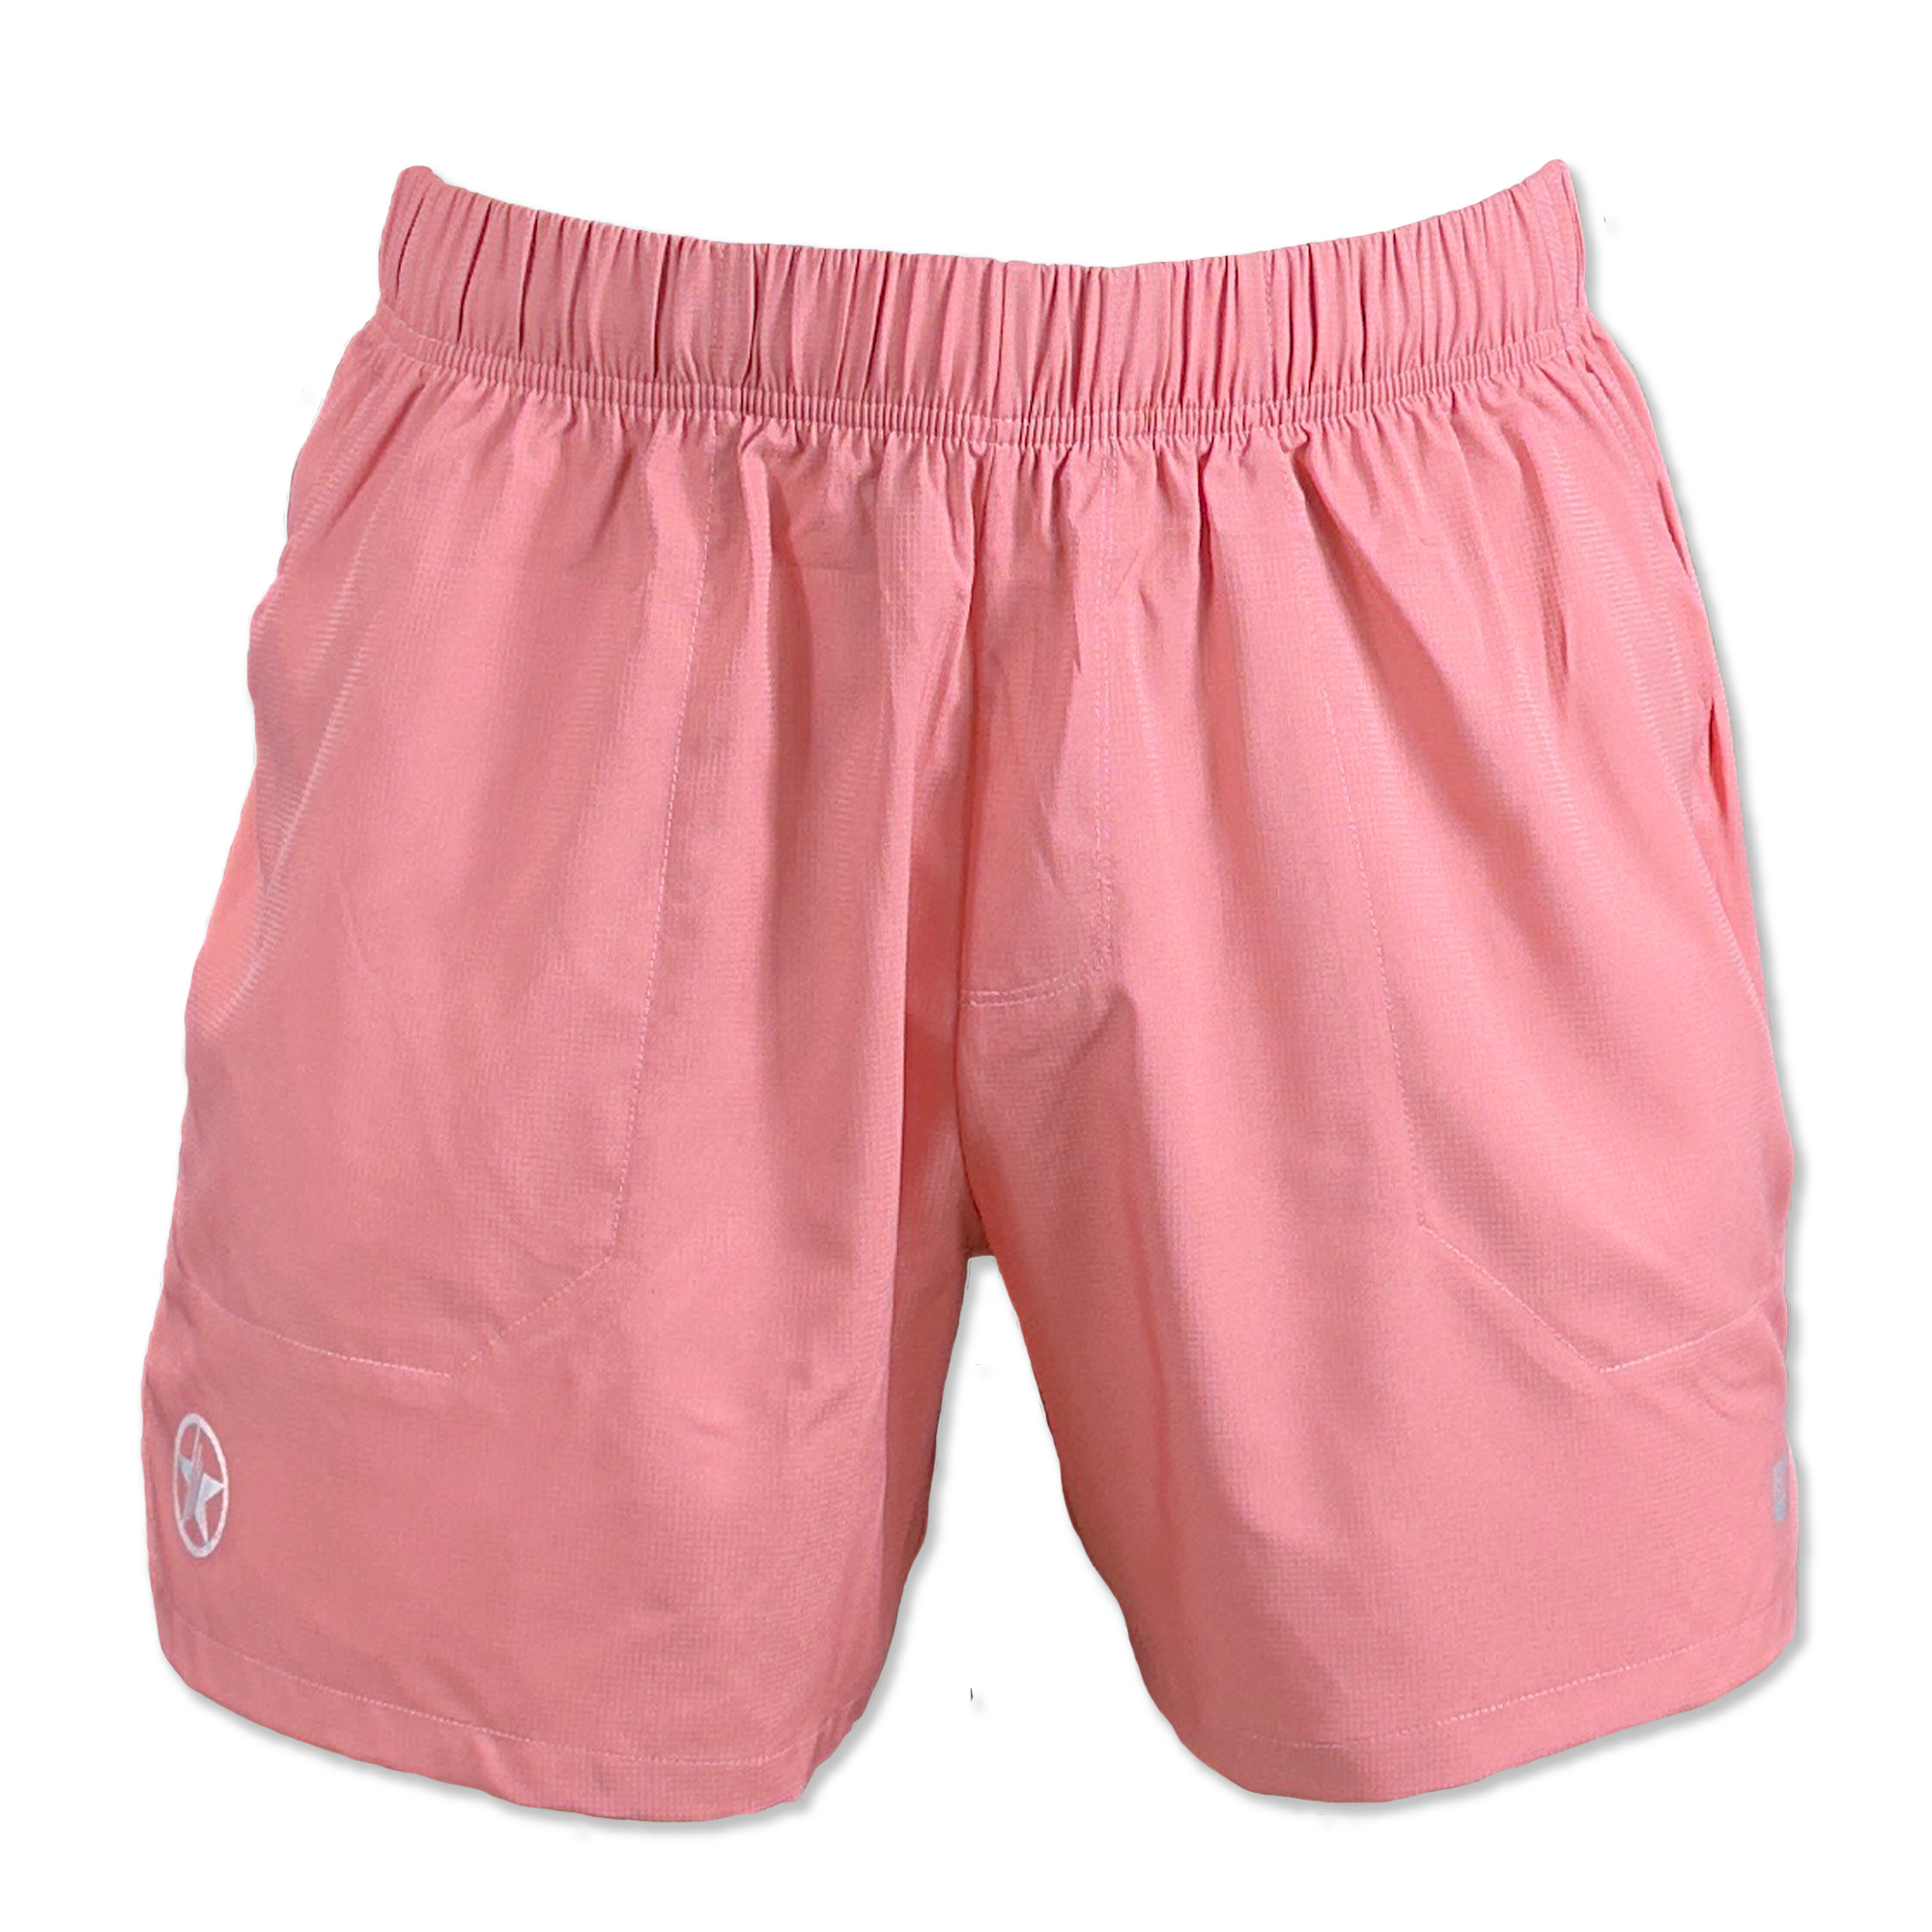 Men's Shorts - Competition 3.0 - Sunstone - Savage Barbell Apparel